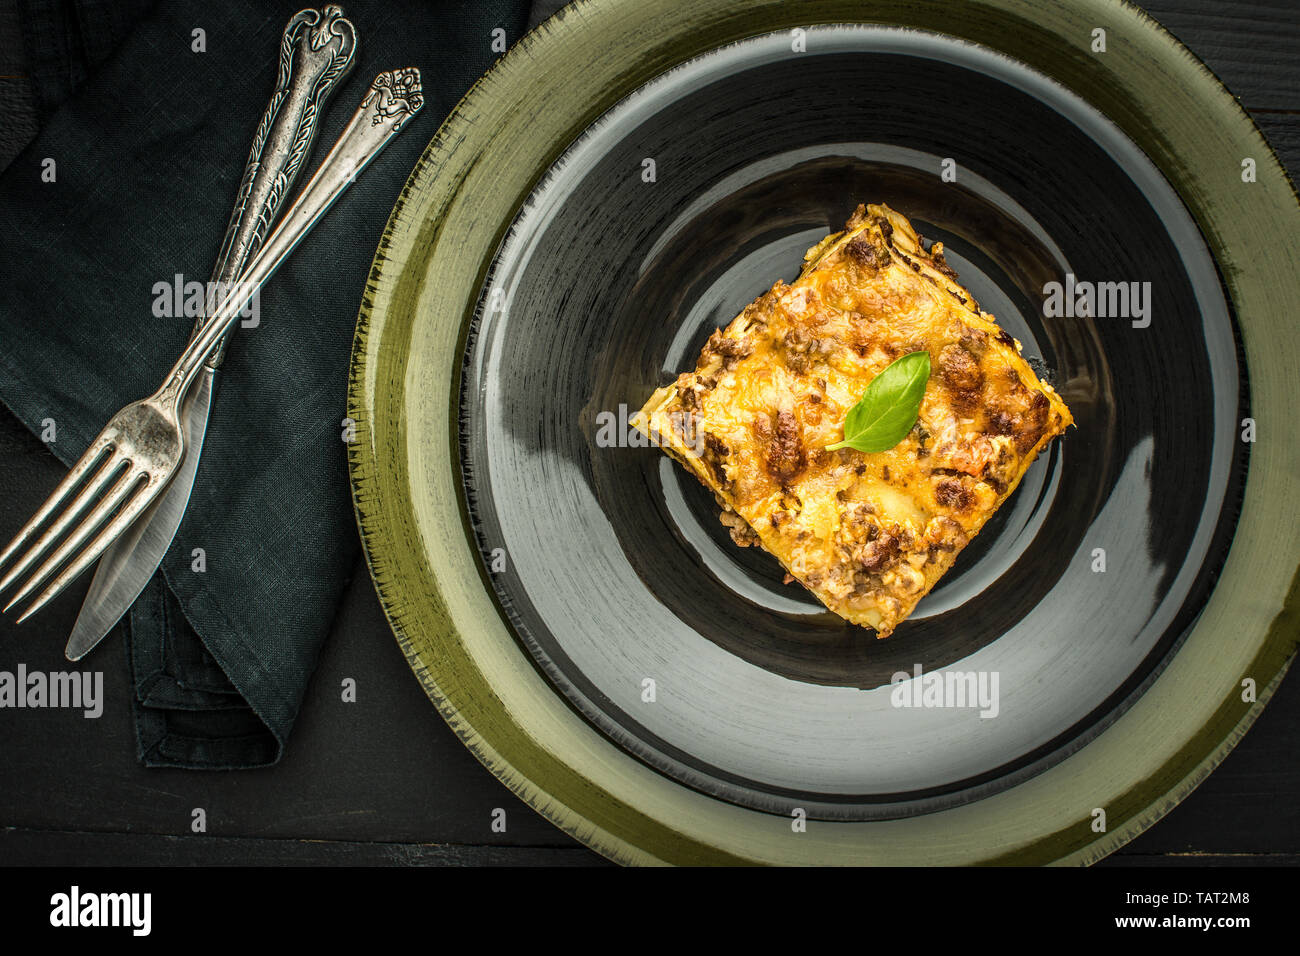 Italian Lasagne with Minced Beef and Green Basil on Dark Plate Stock Photo